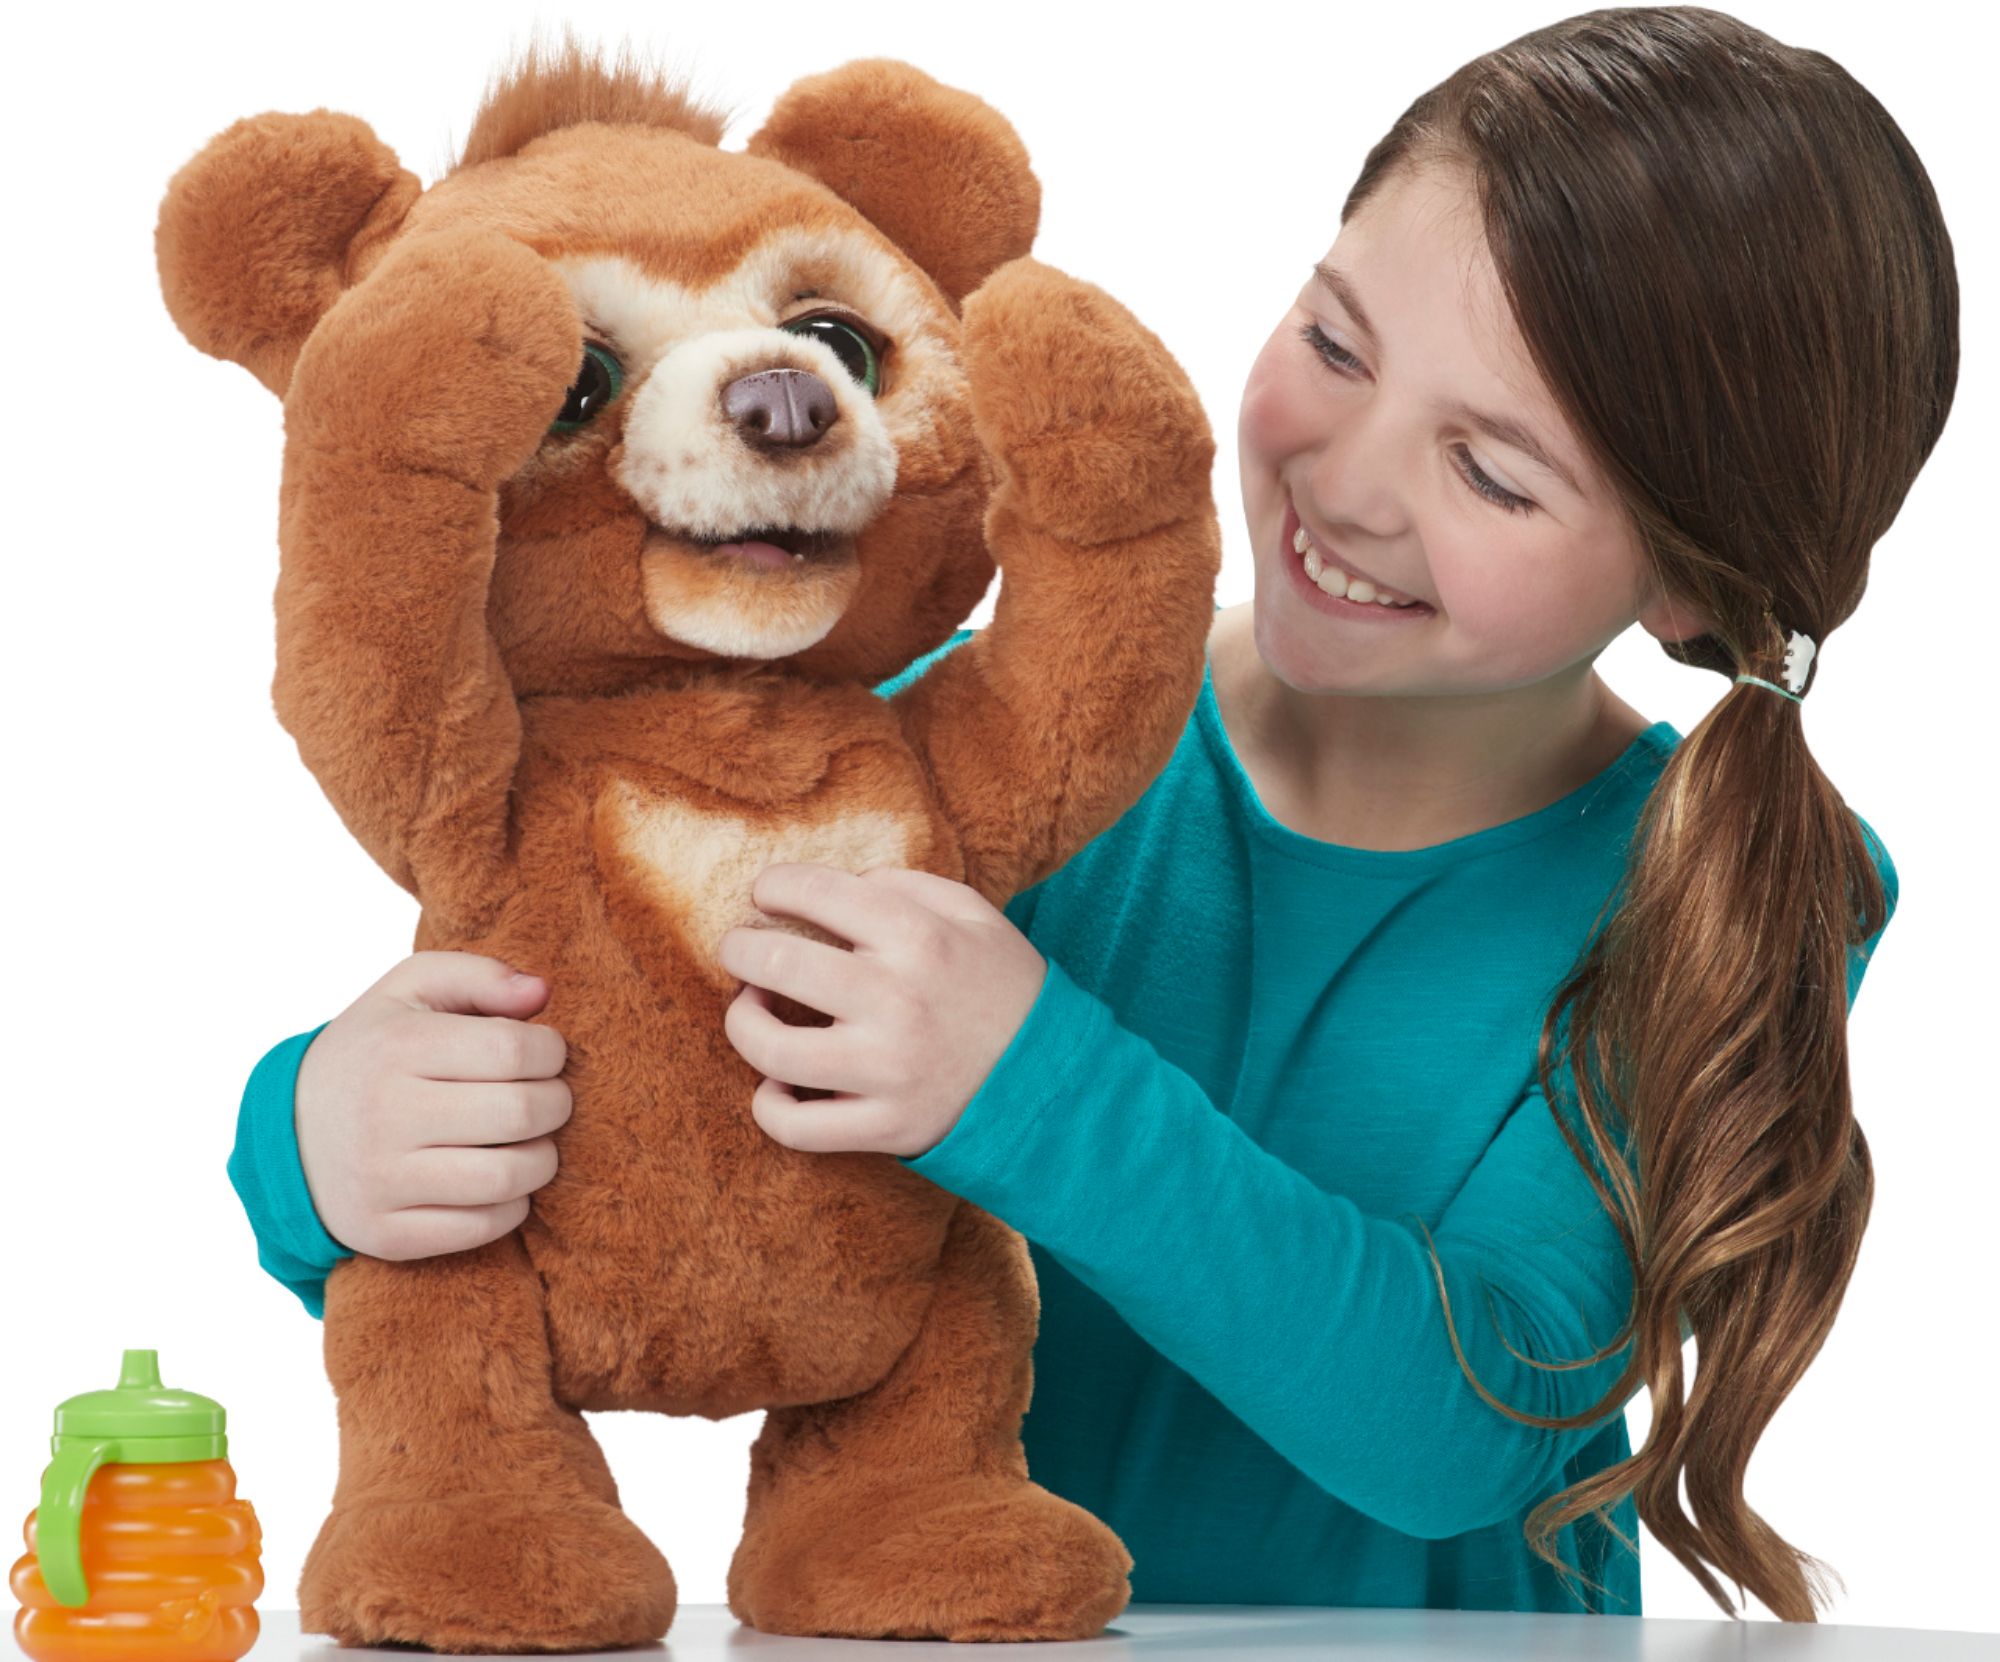 furreal cubby the curious bear interactive plush toy